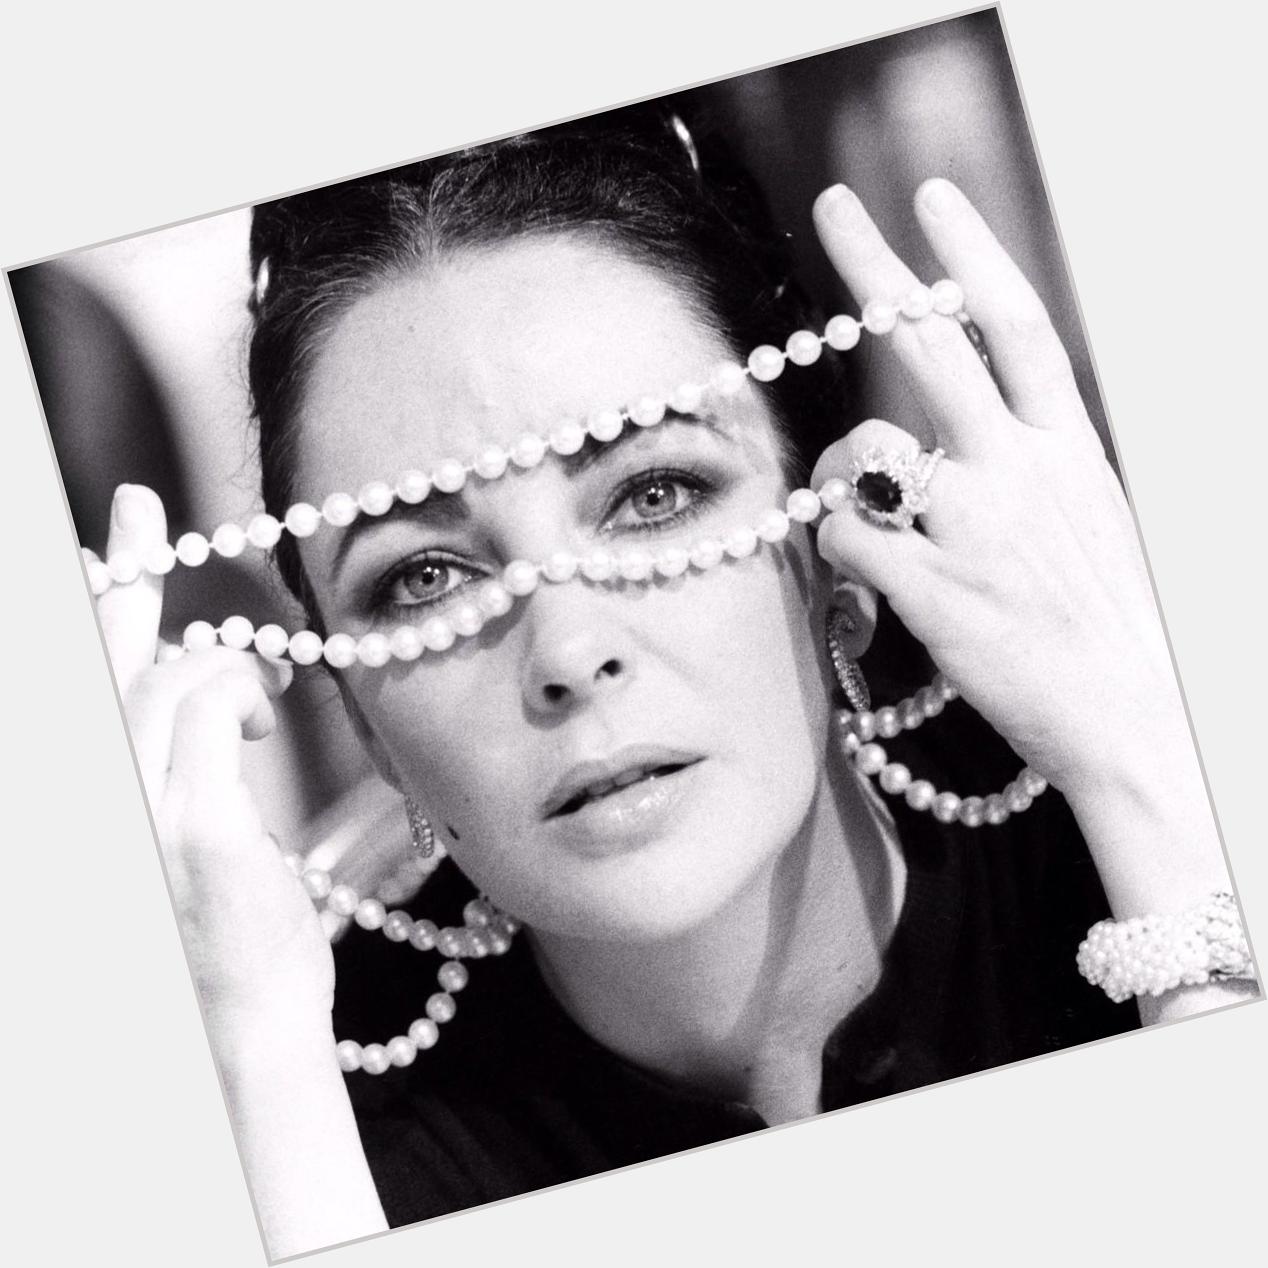 Happy birthday to the one and only Elizabeth Taylor! Seen here wearing her own David Webb jewelry in Ash Wednesday 